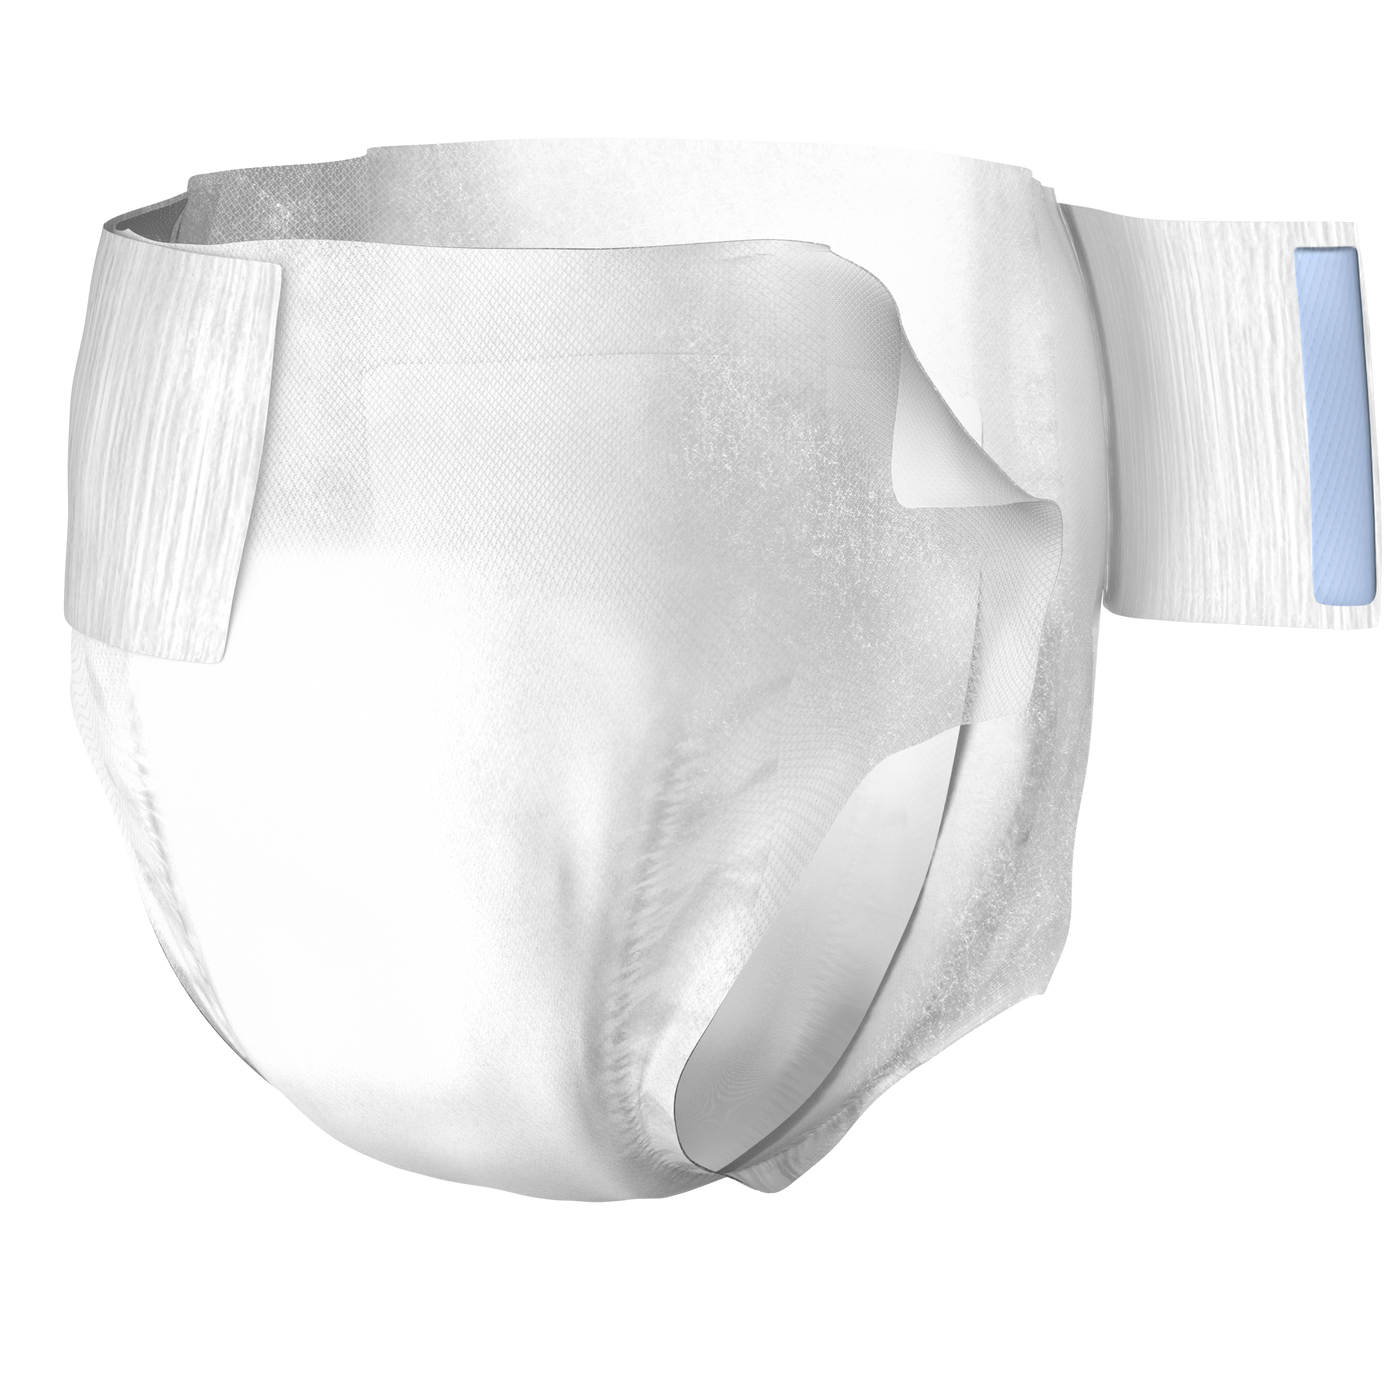 Adult diapers for incontinence  Prevail Breezers360 Adult Briefs with  Extra Breathability –